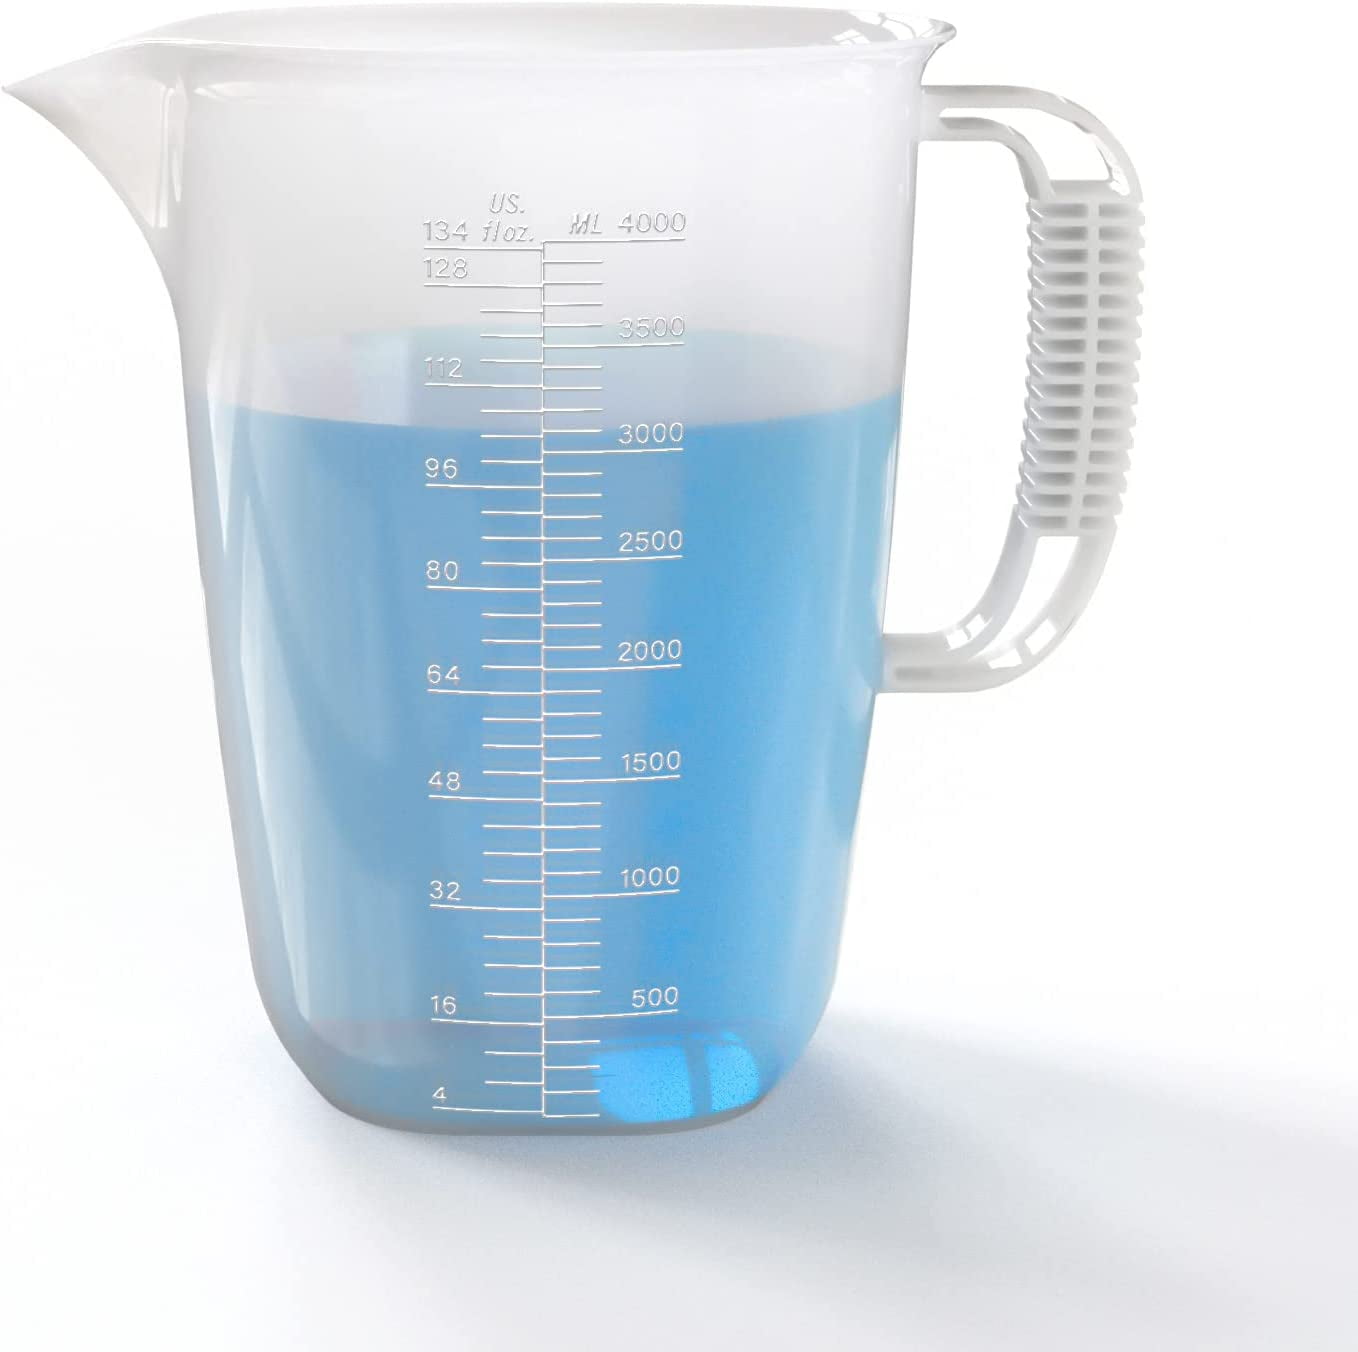 4 Cup (1 liter) Measuring Cups Polypropylene Calibrated in oz and mL 1/Pk